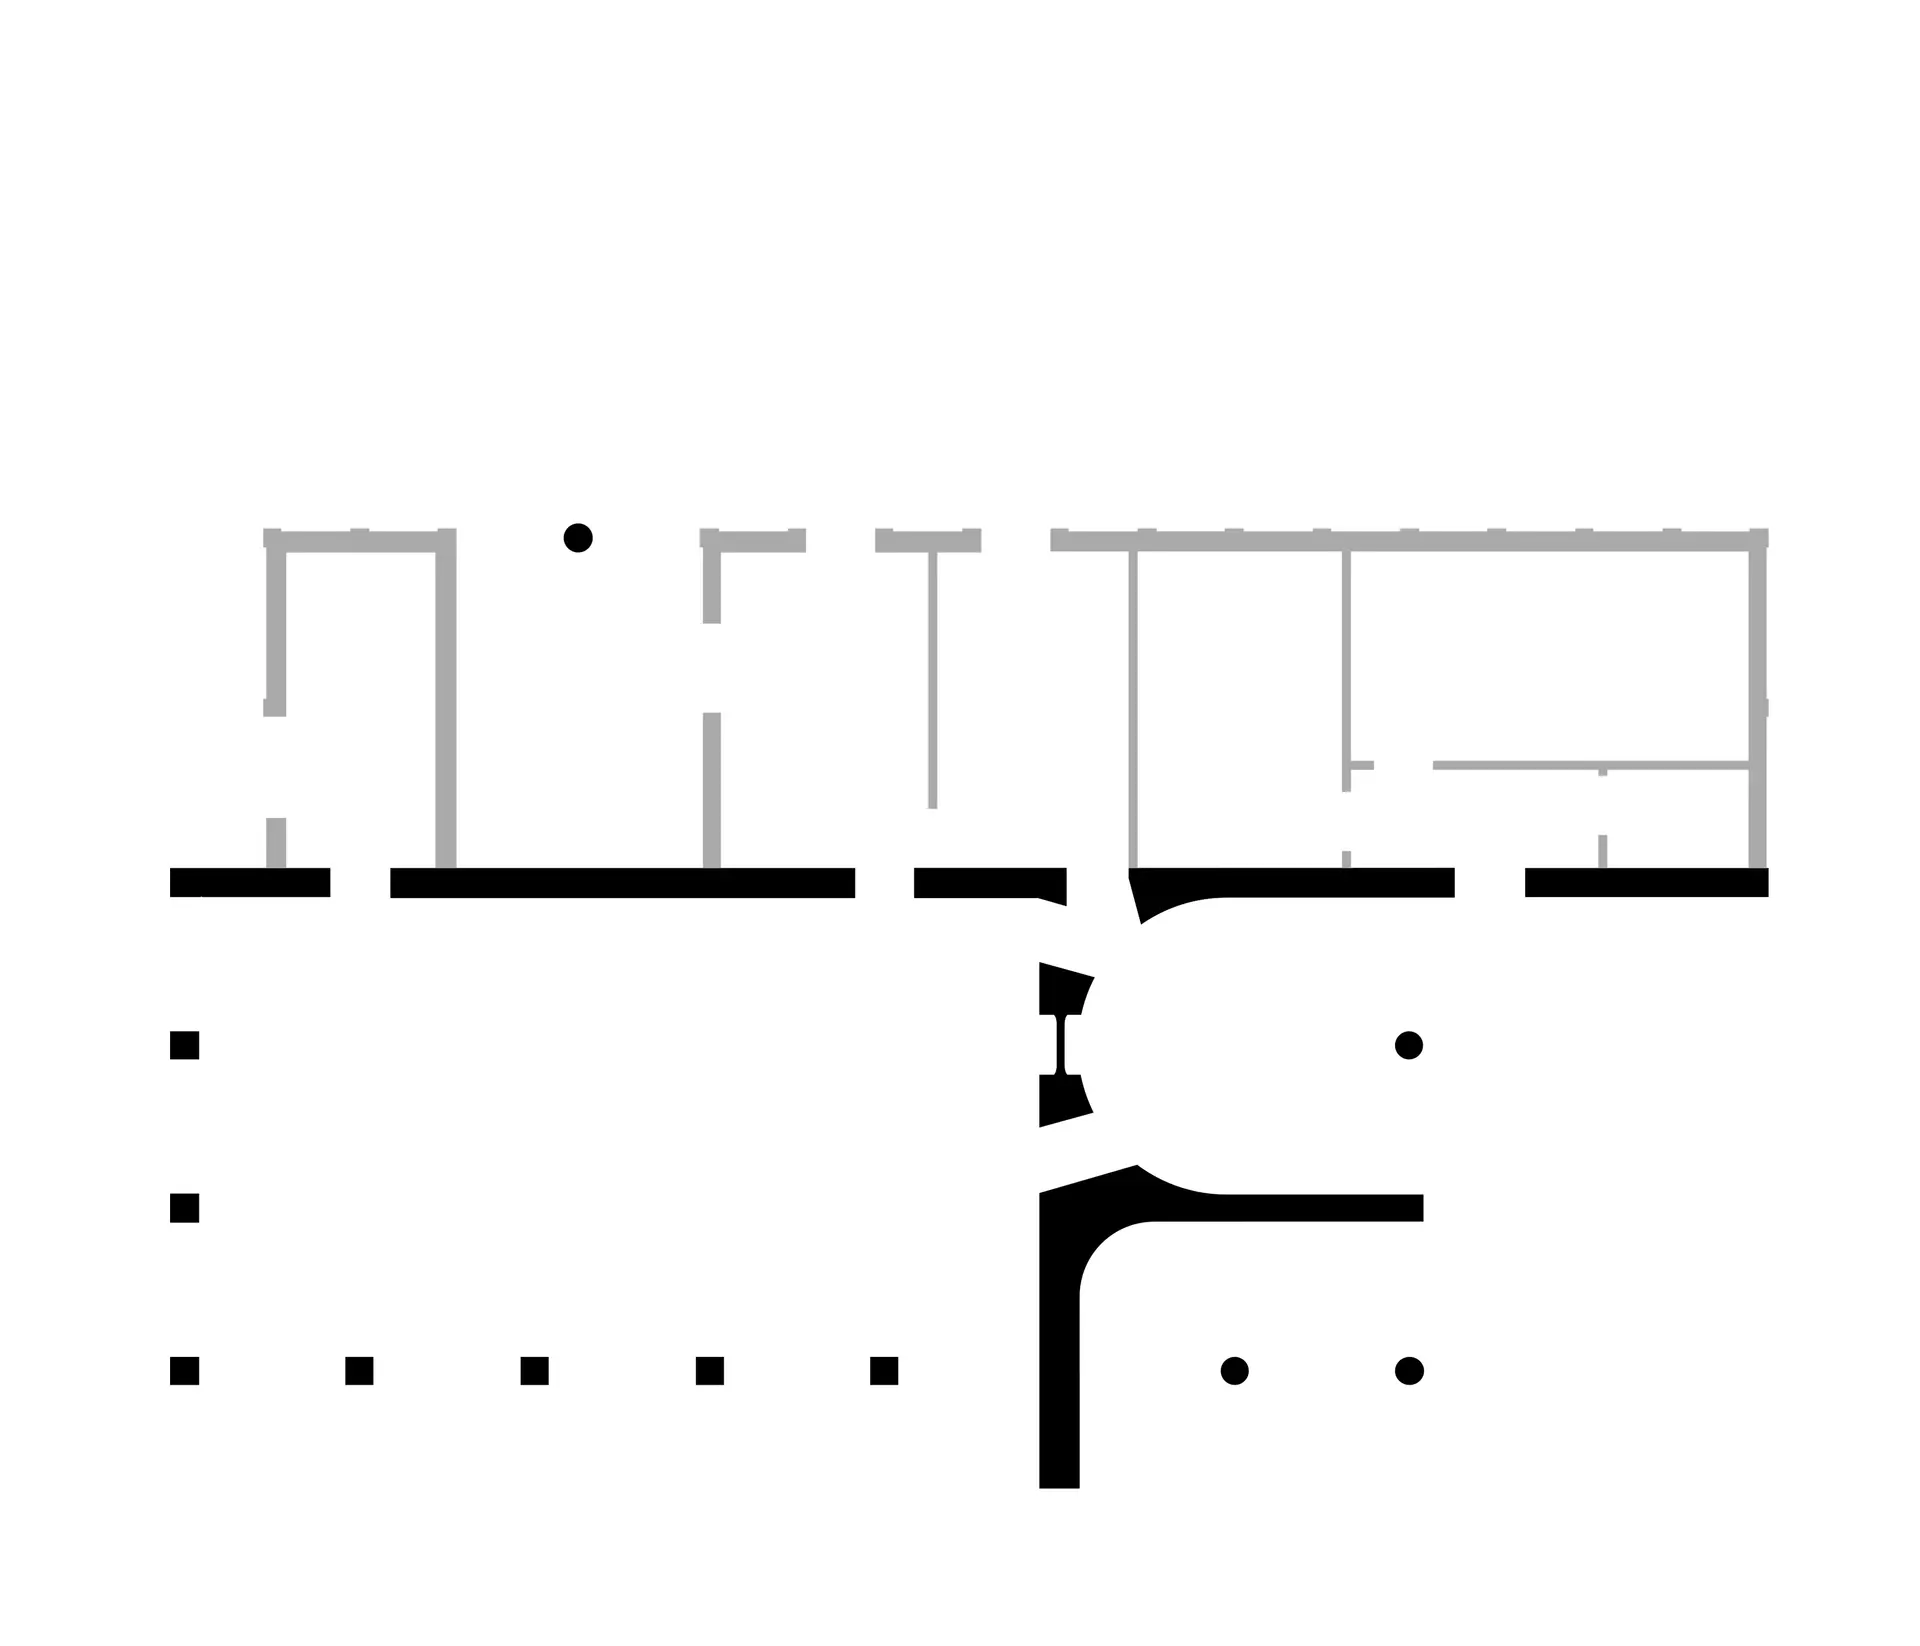 Plan diagram showing rammed earth in black and timber framining in grey